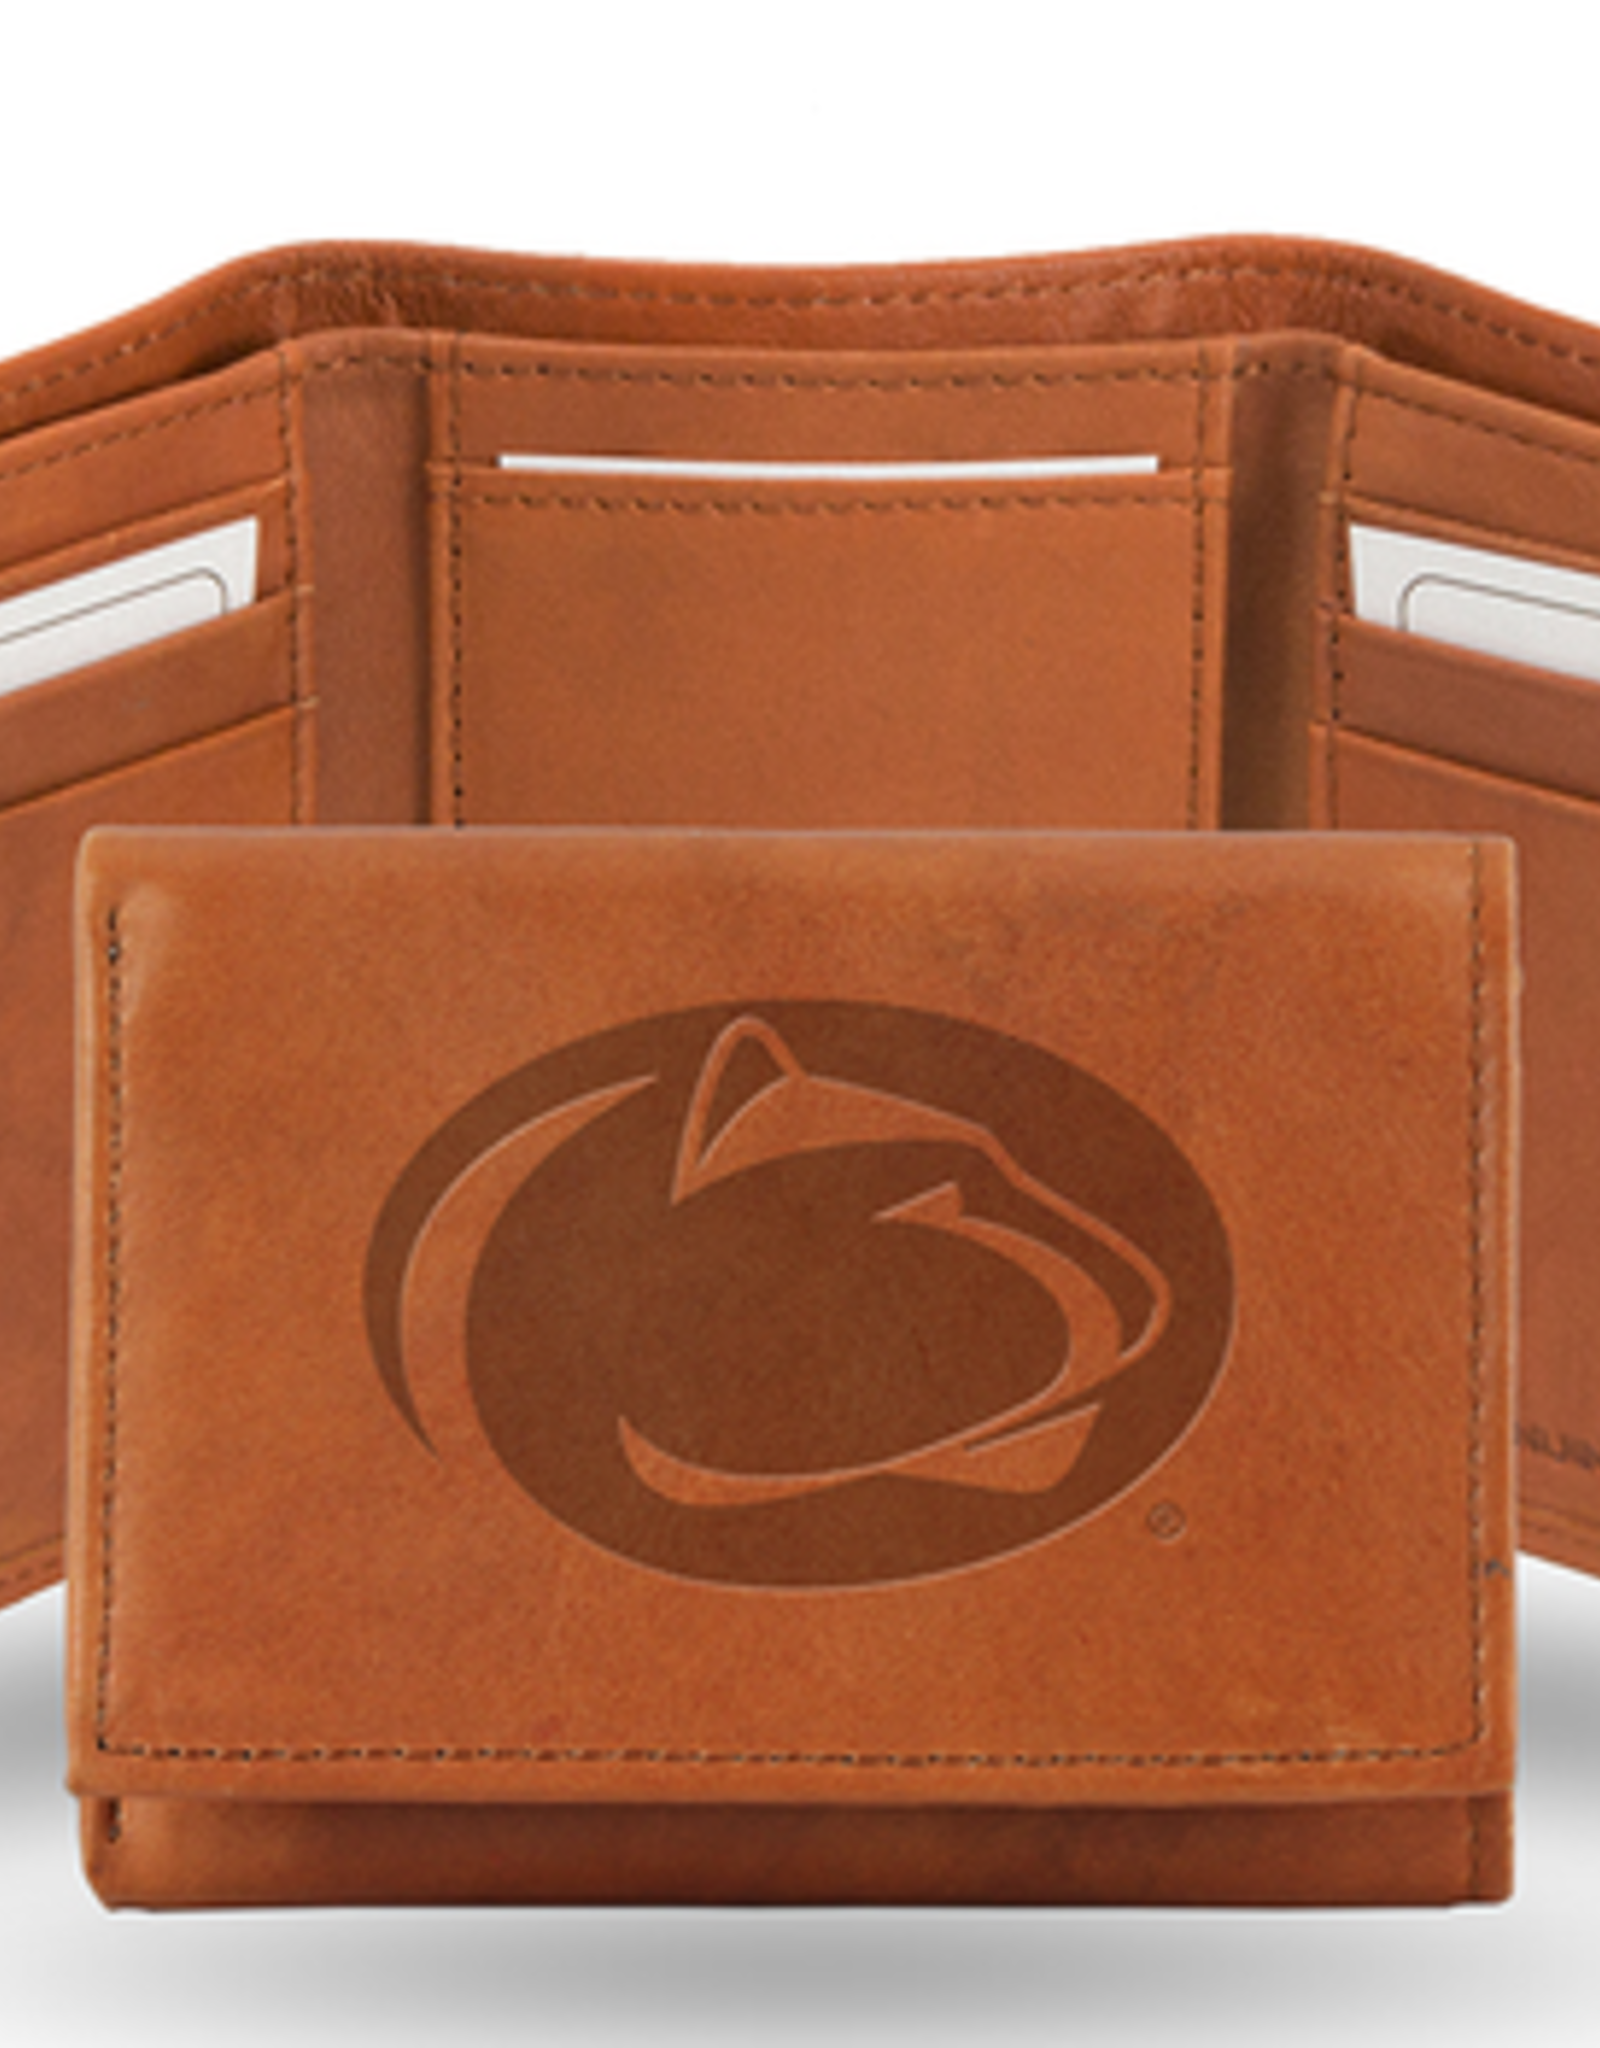 RICO INDUSTRIES Penn State Nittany Lions Vintage Leather Trifold Wallet